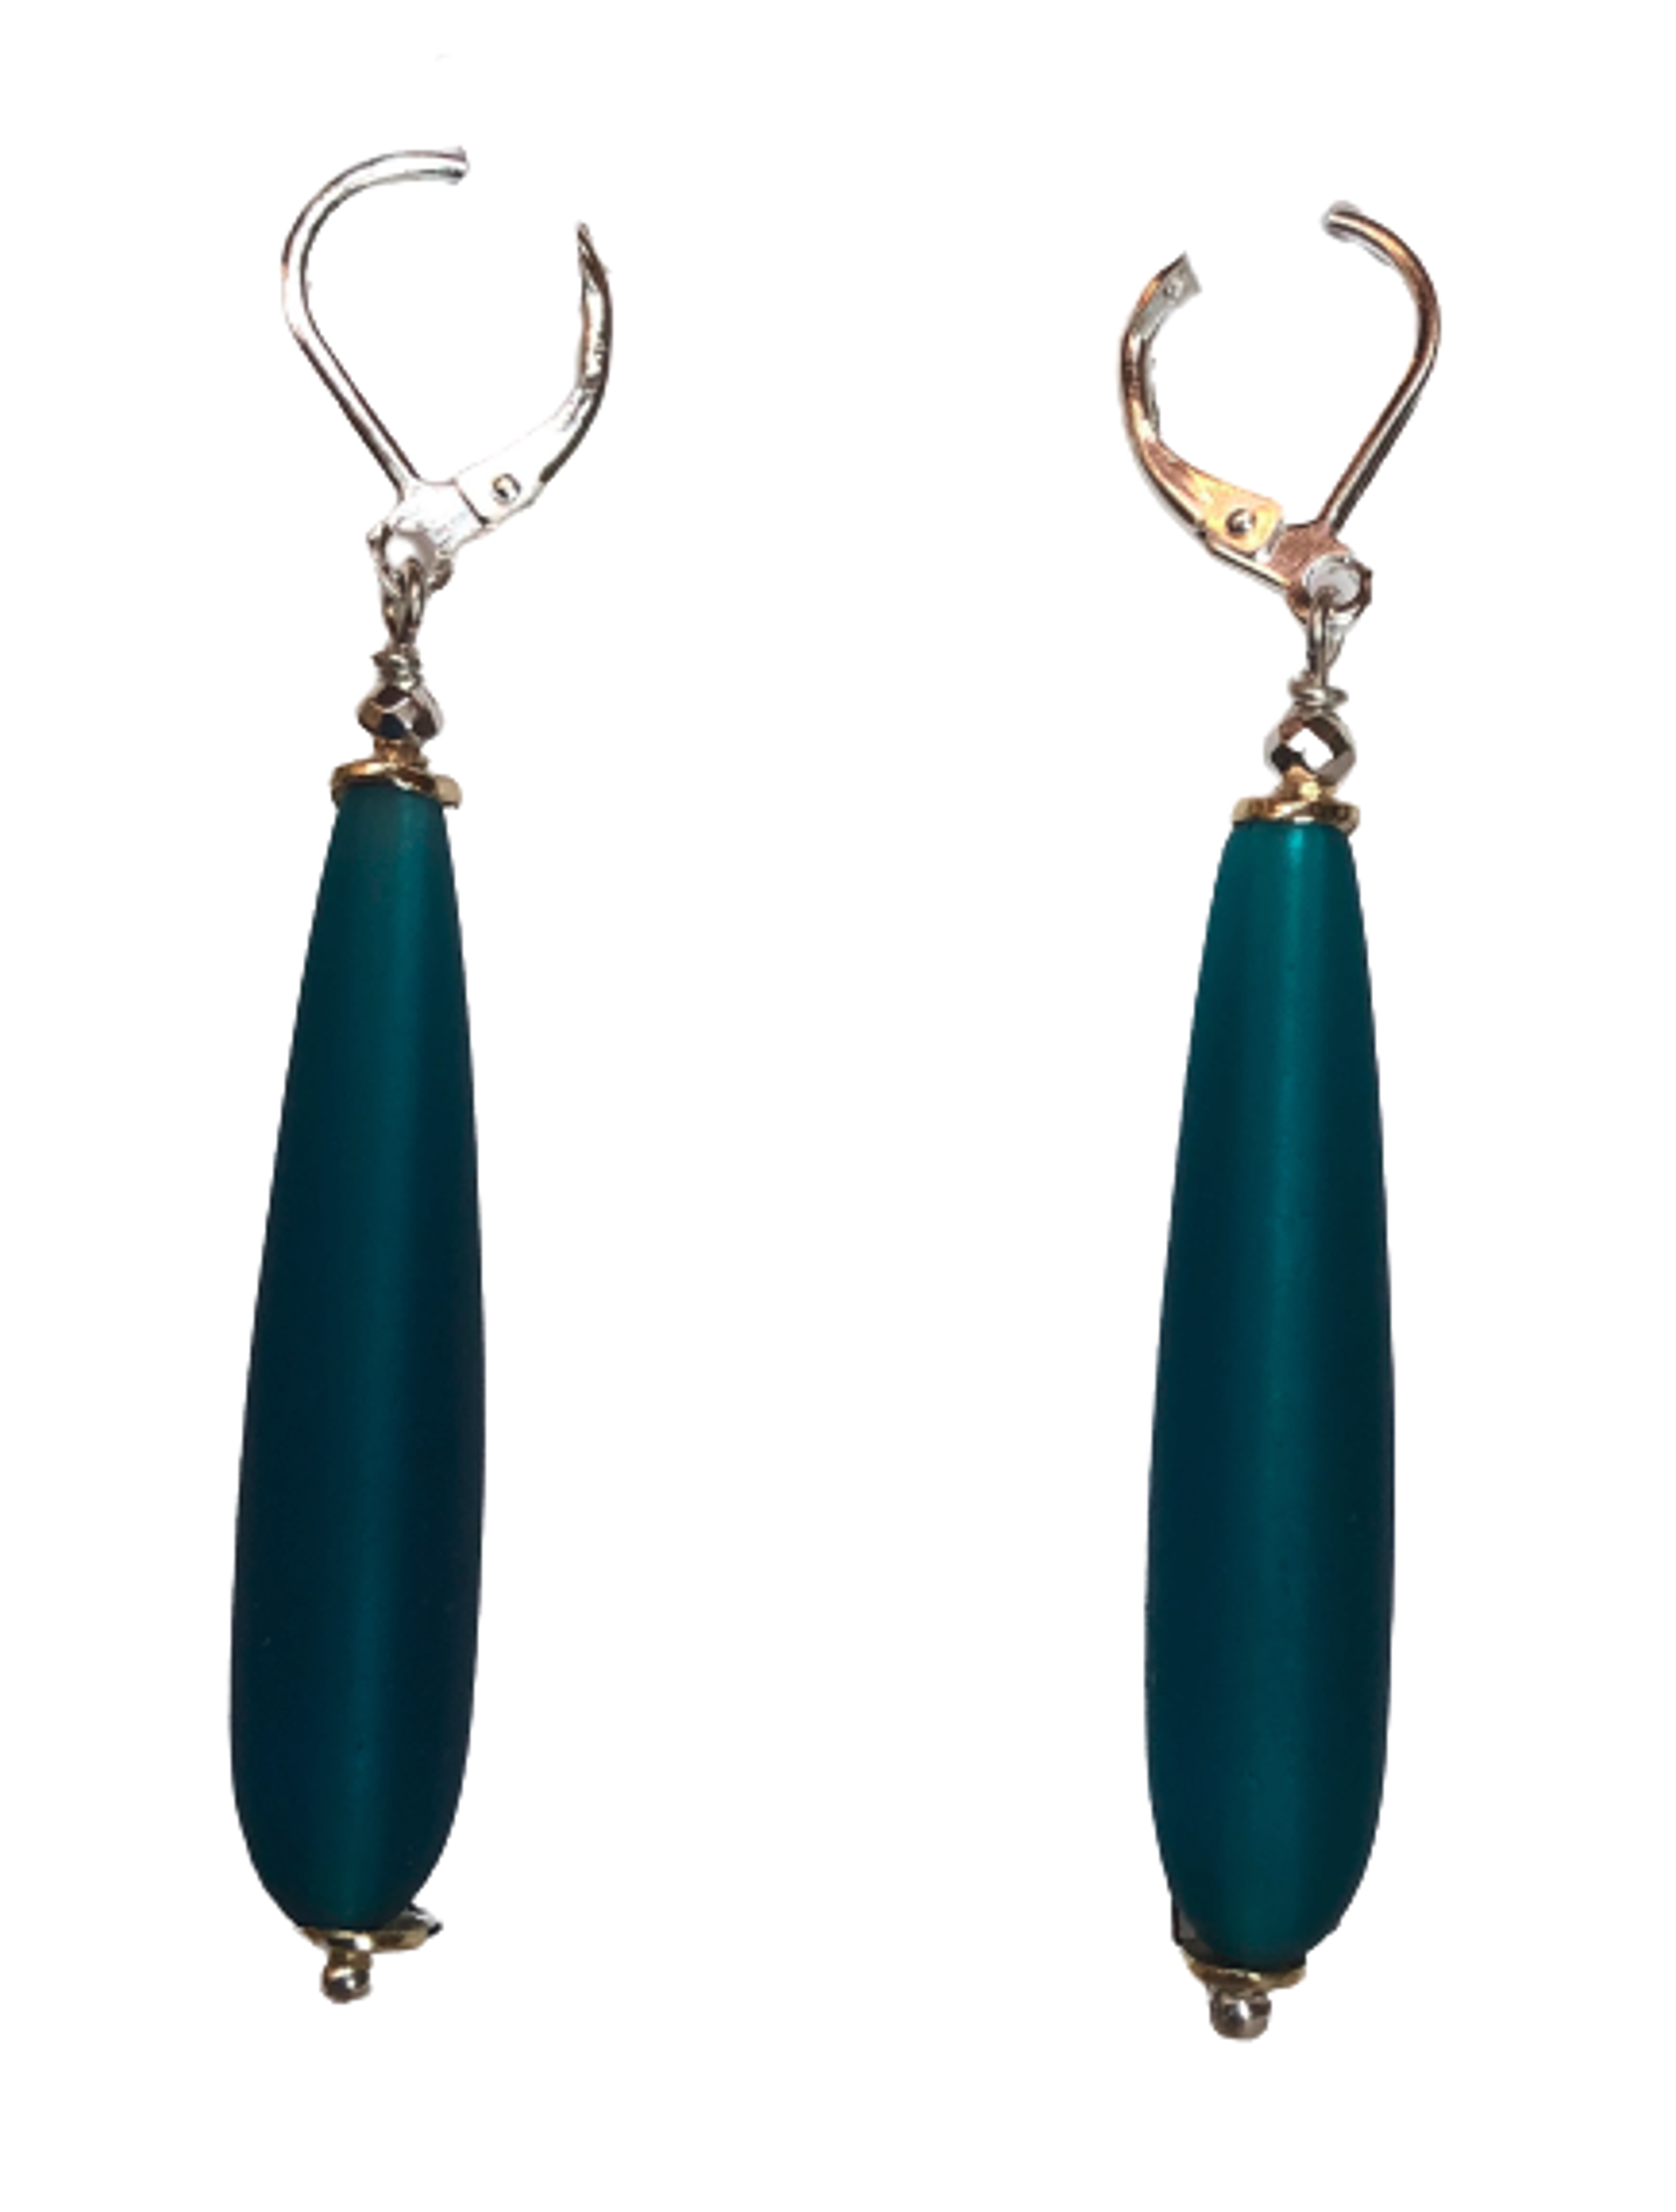 Earrings - Frost Me Teal - Frosted glass long drops 1.5 " -teal on sterling silver lever backs by Melissa Rogers